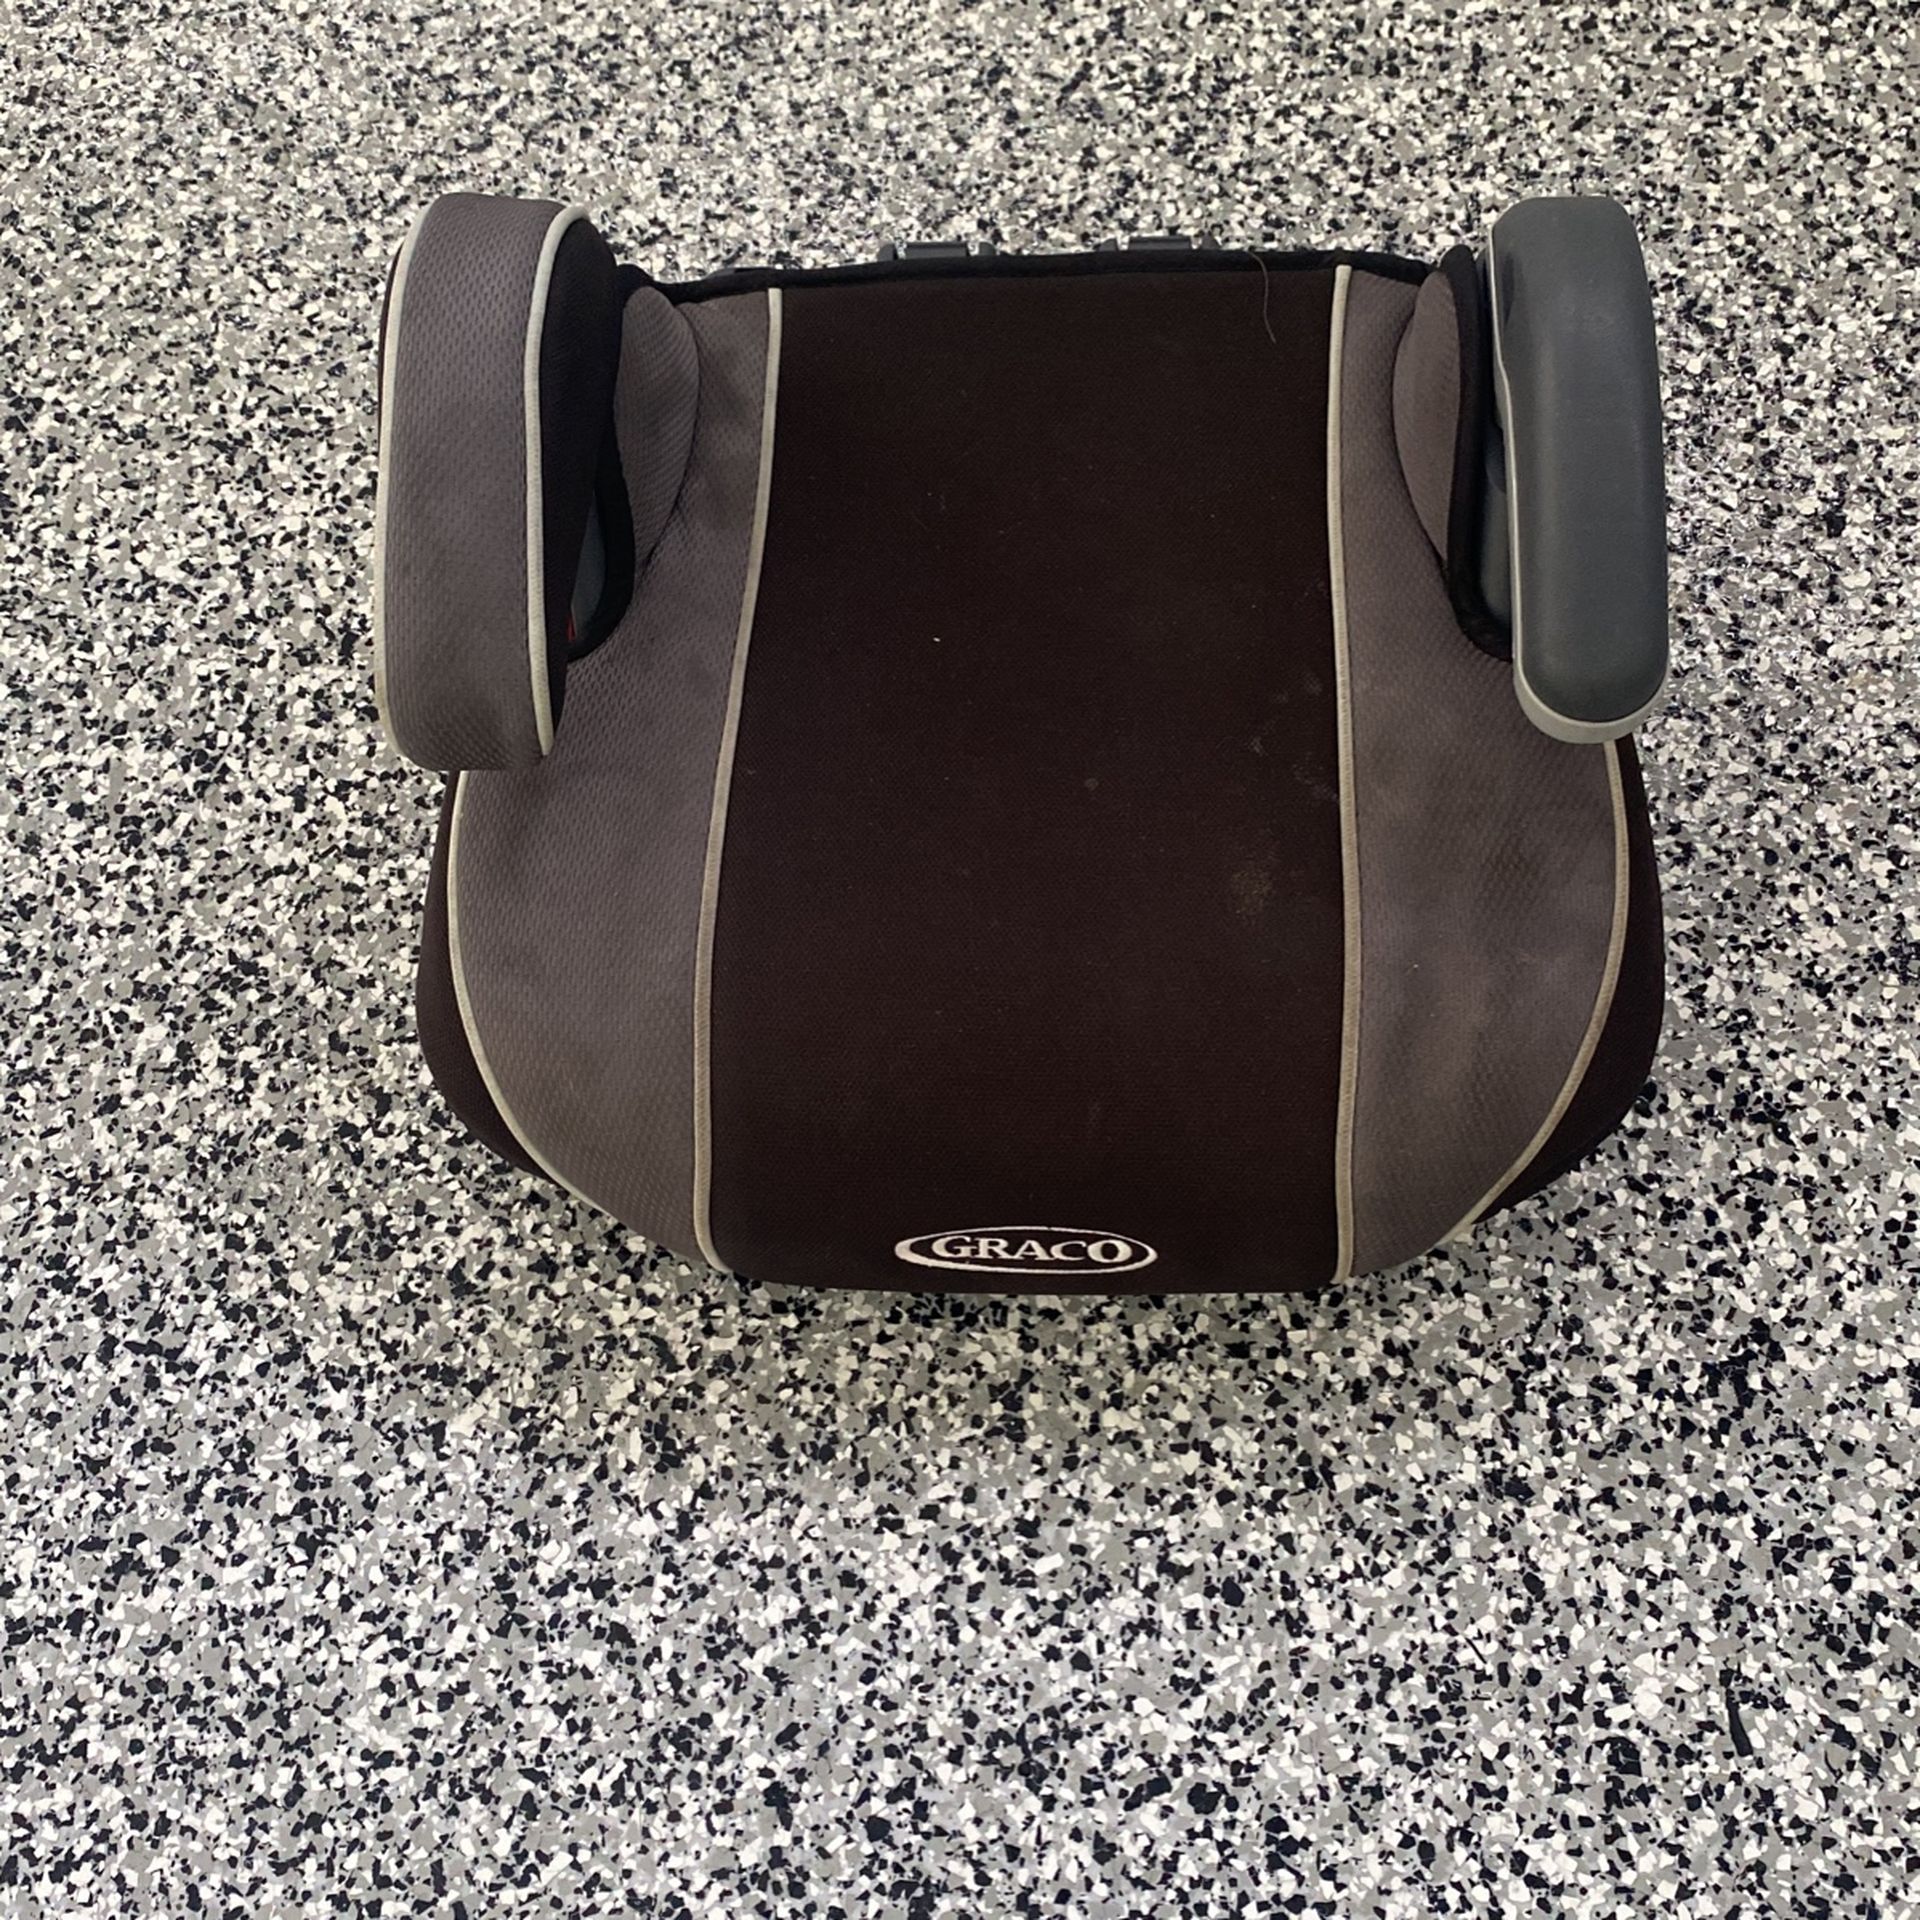 Graco Turbobooster Backless Car Seat